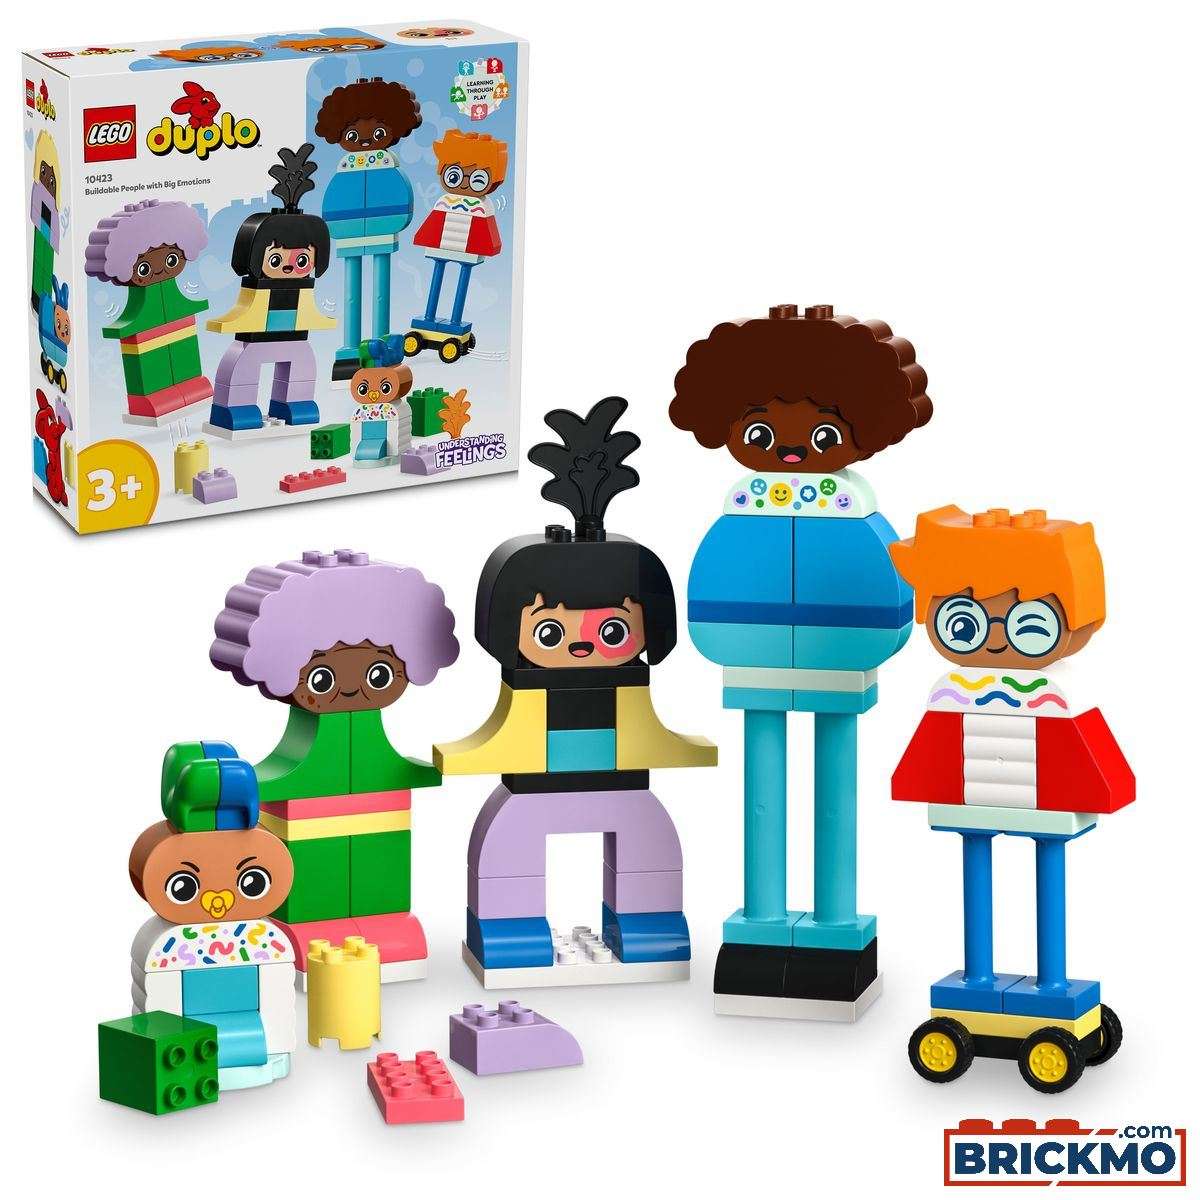 LEGO Duplo 10423 Buildable People with Big Emotions 10423